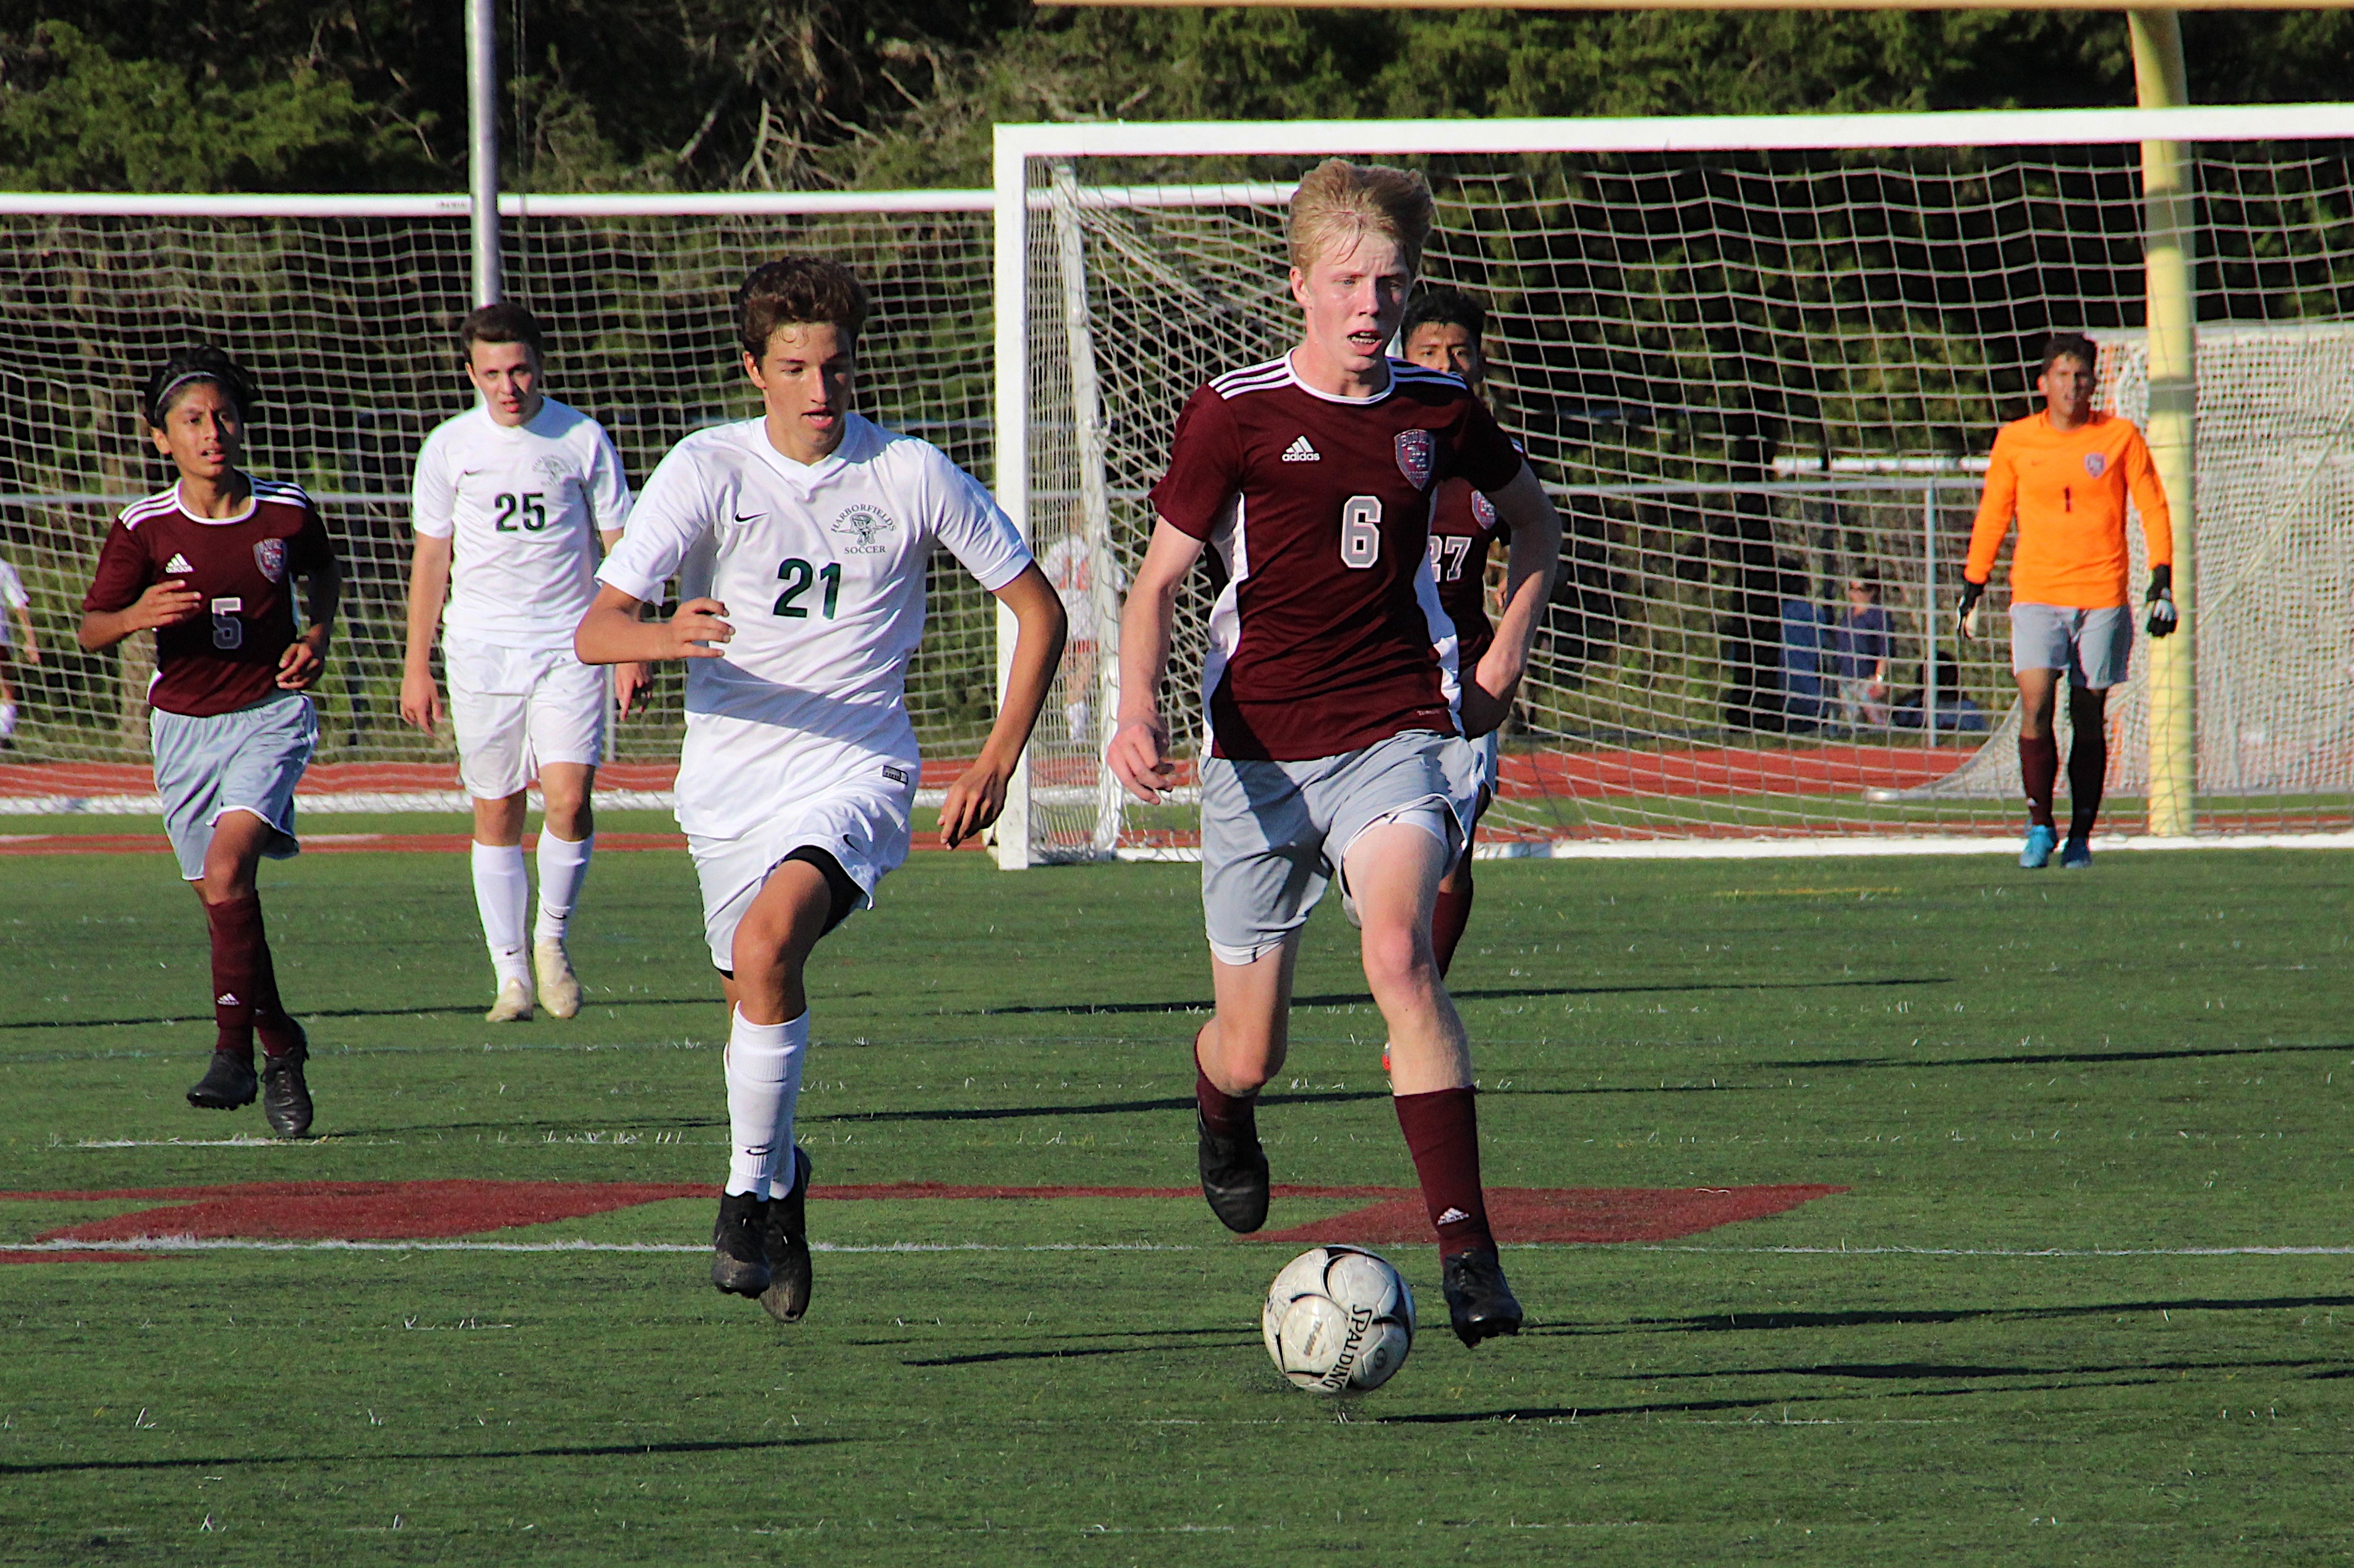 East Hampton's Matthew McGovern races the ball downfield with a Harborfields player trailing him.